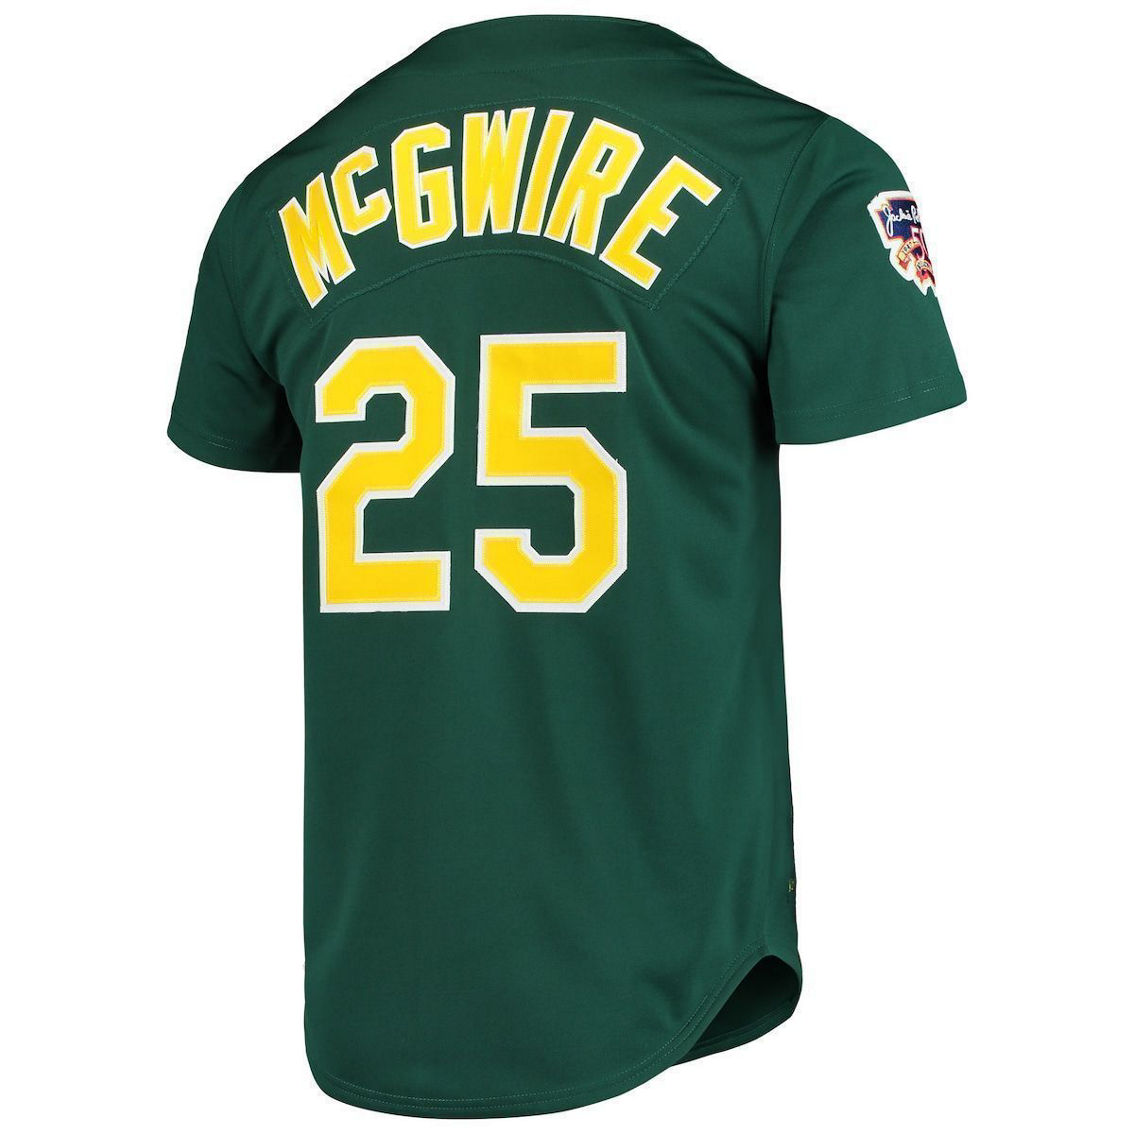 Mitchell & Ness Men's Mark McGwire Green Oakland Athletics 1997 Cooperstown Collection Authentic Jersey - Image 4 of 4